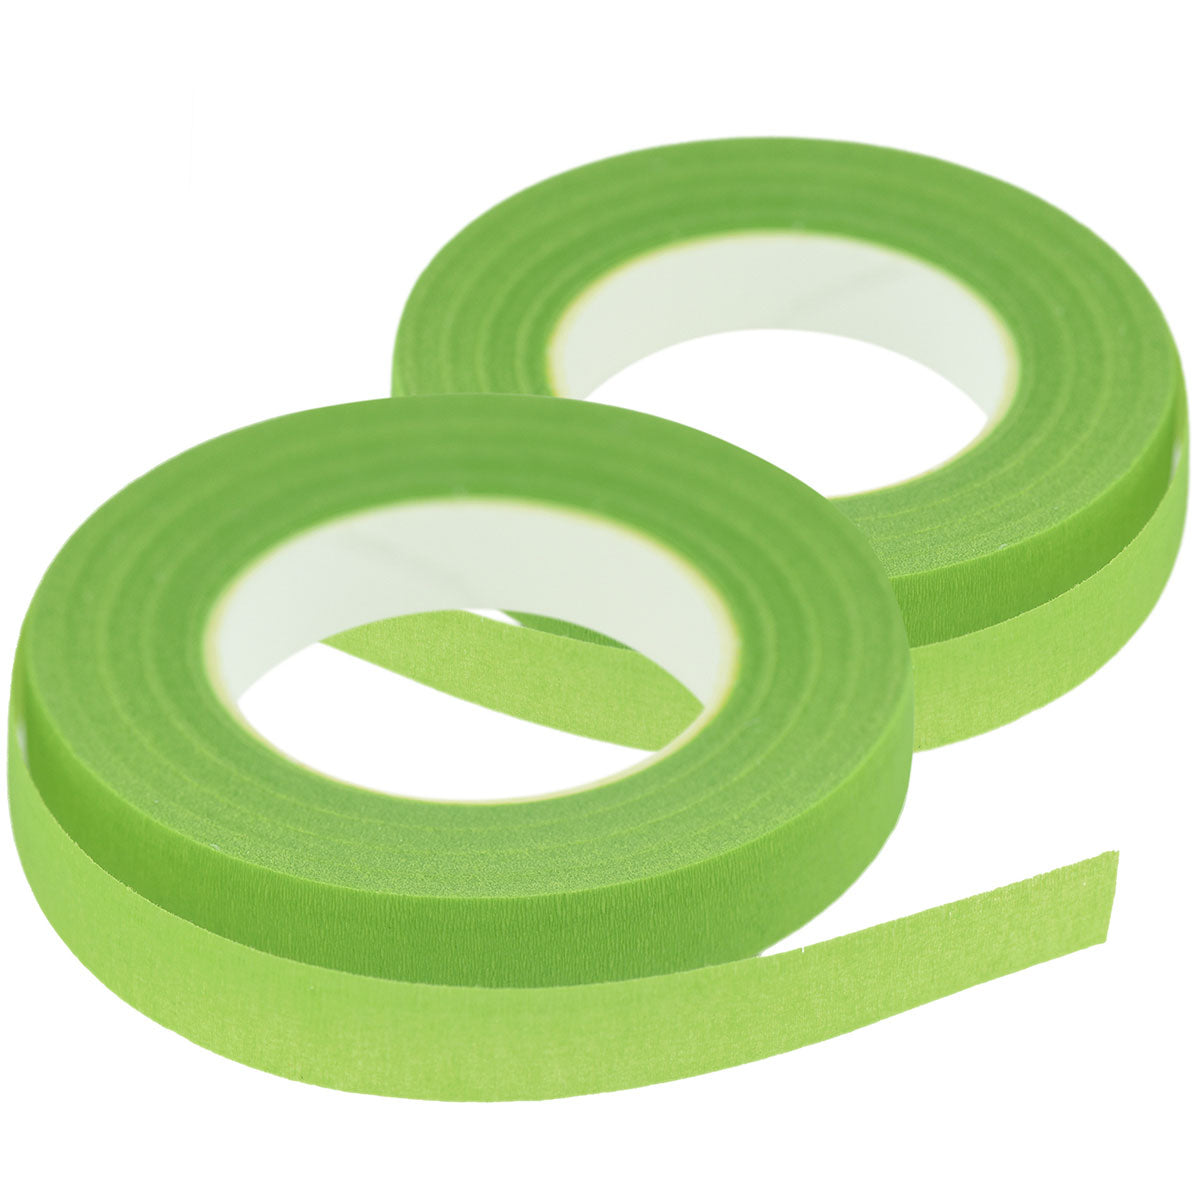 Light Green Floral Tapes (60 Yards) Binds Flower Stems Together for Bouquets Corsages Boutonnieres 2-Pack